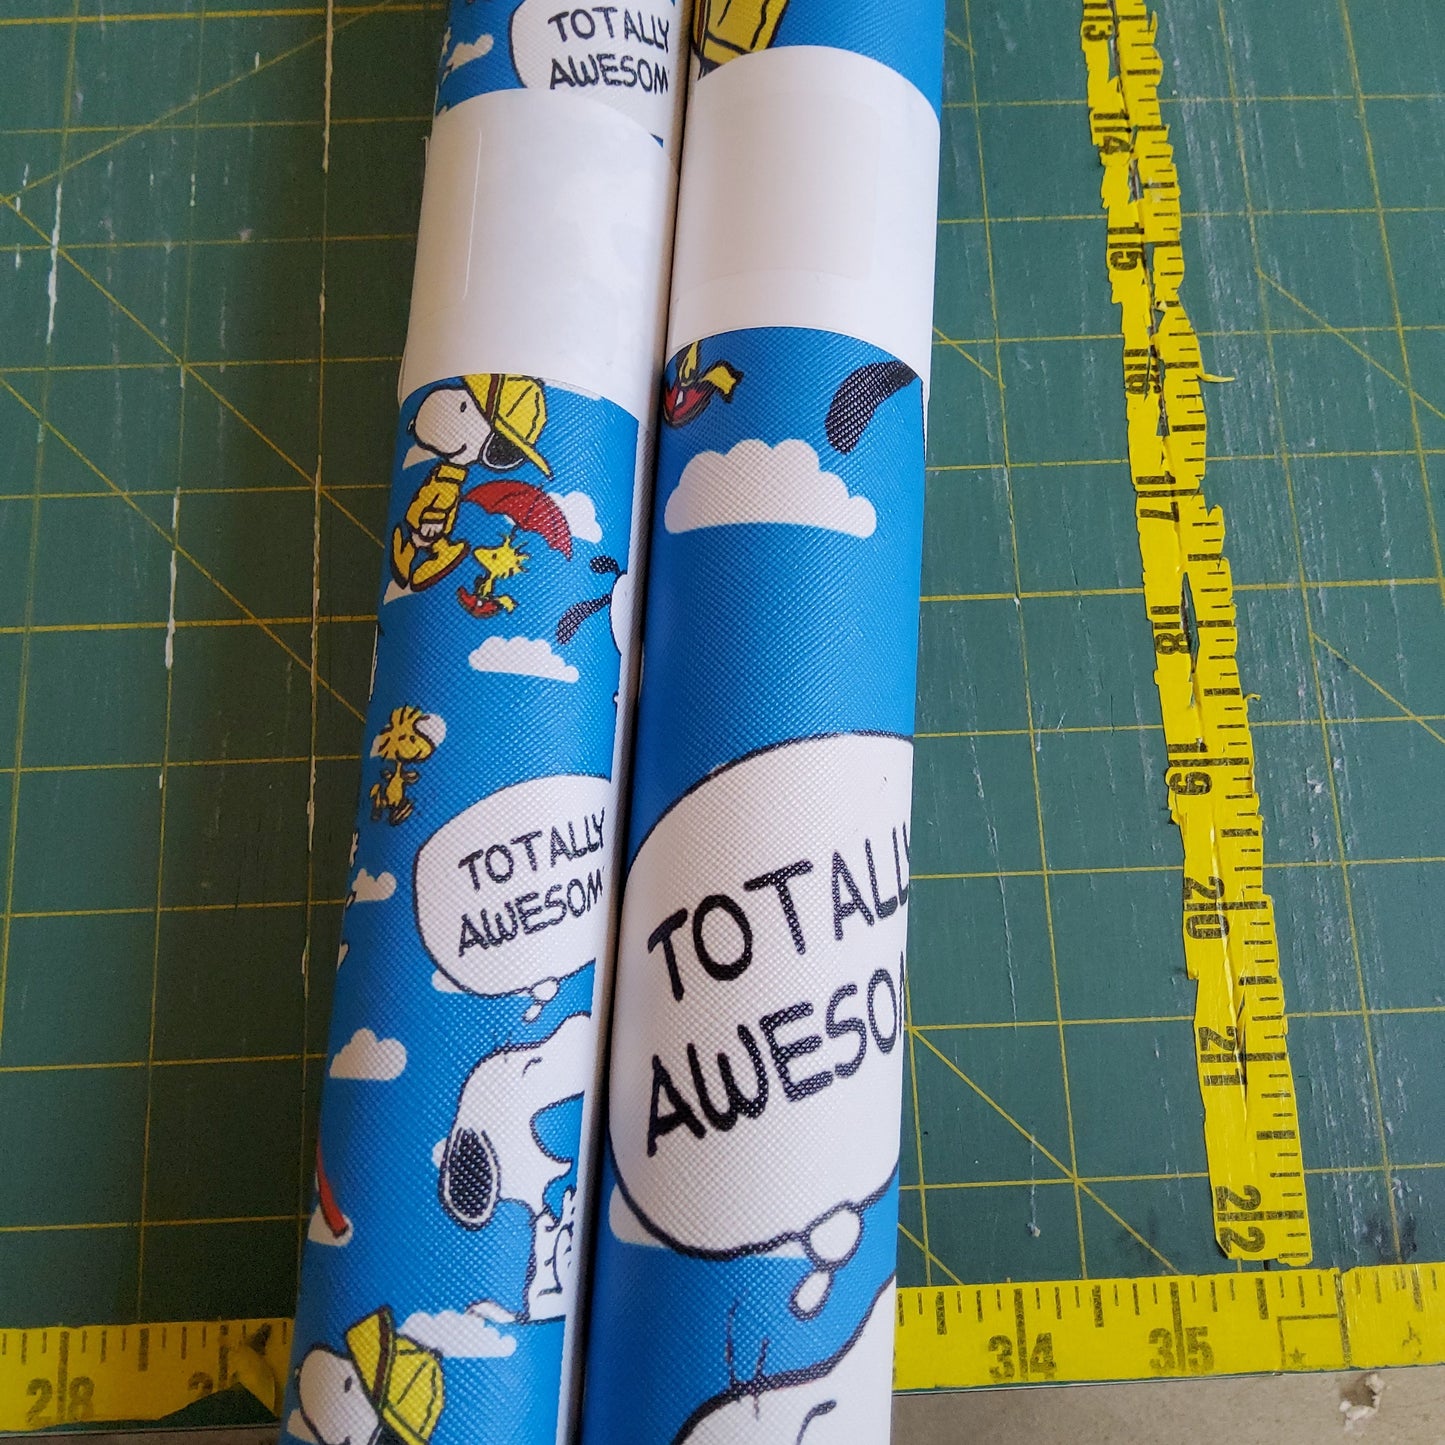 Totally Awesome 18"×54" Roll